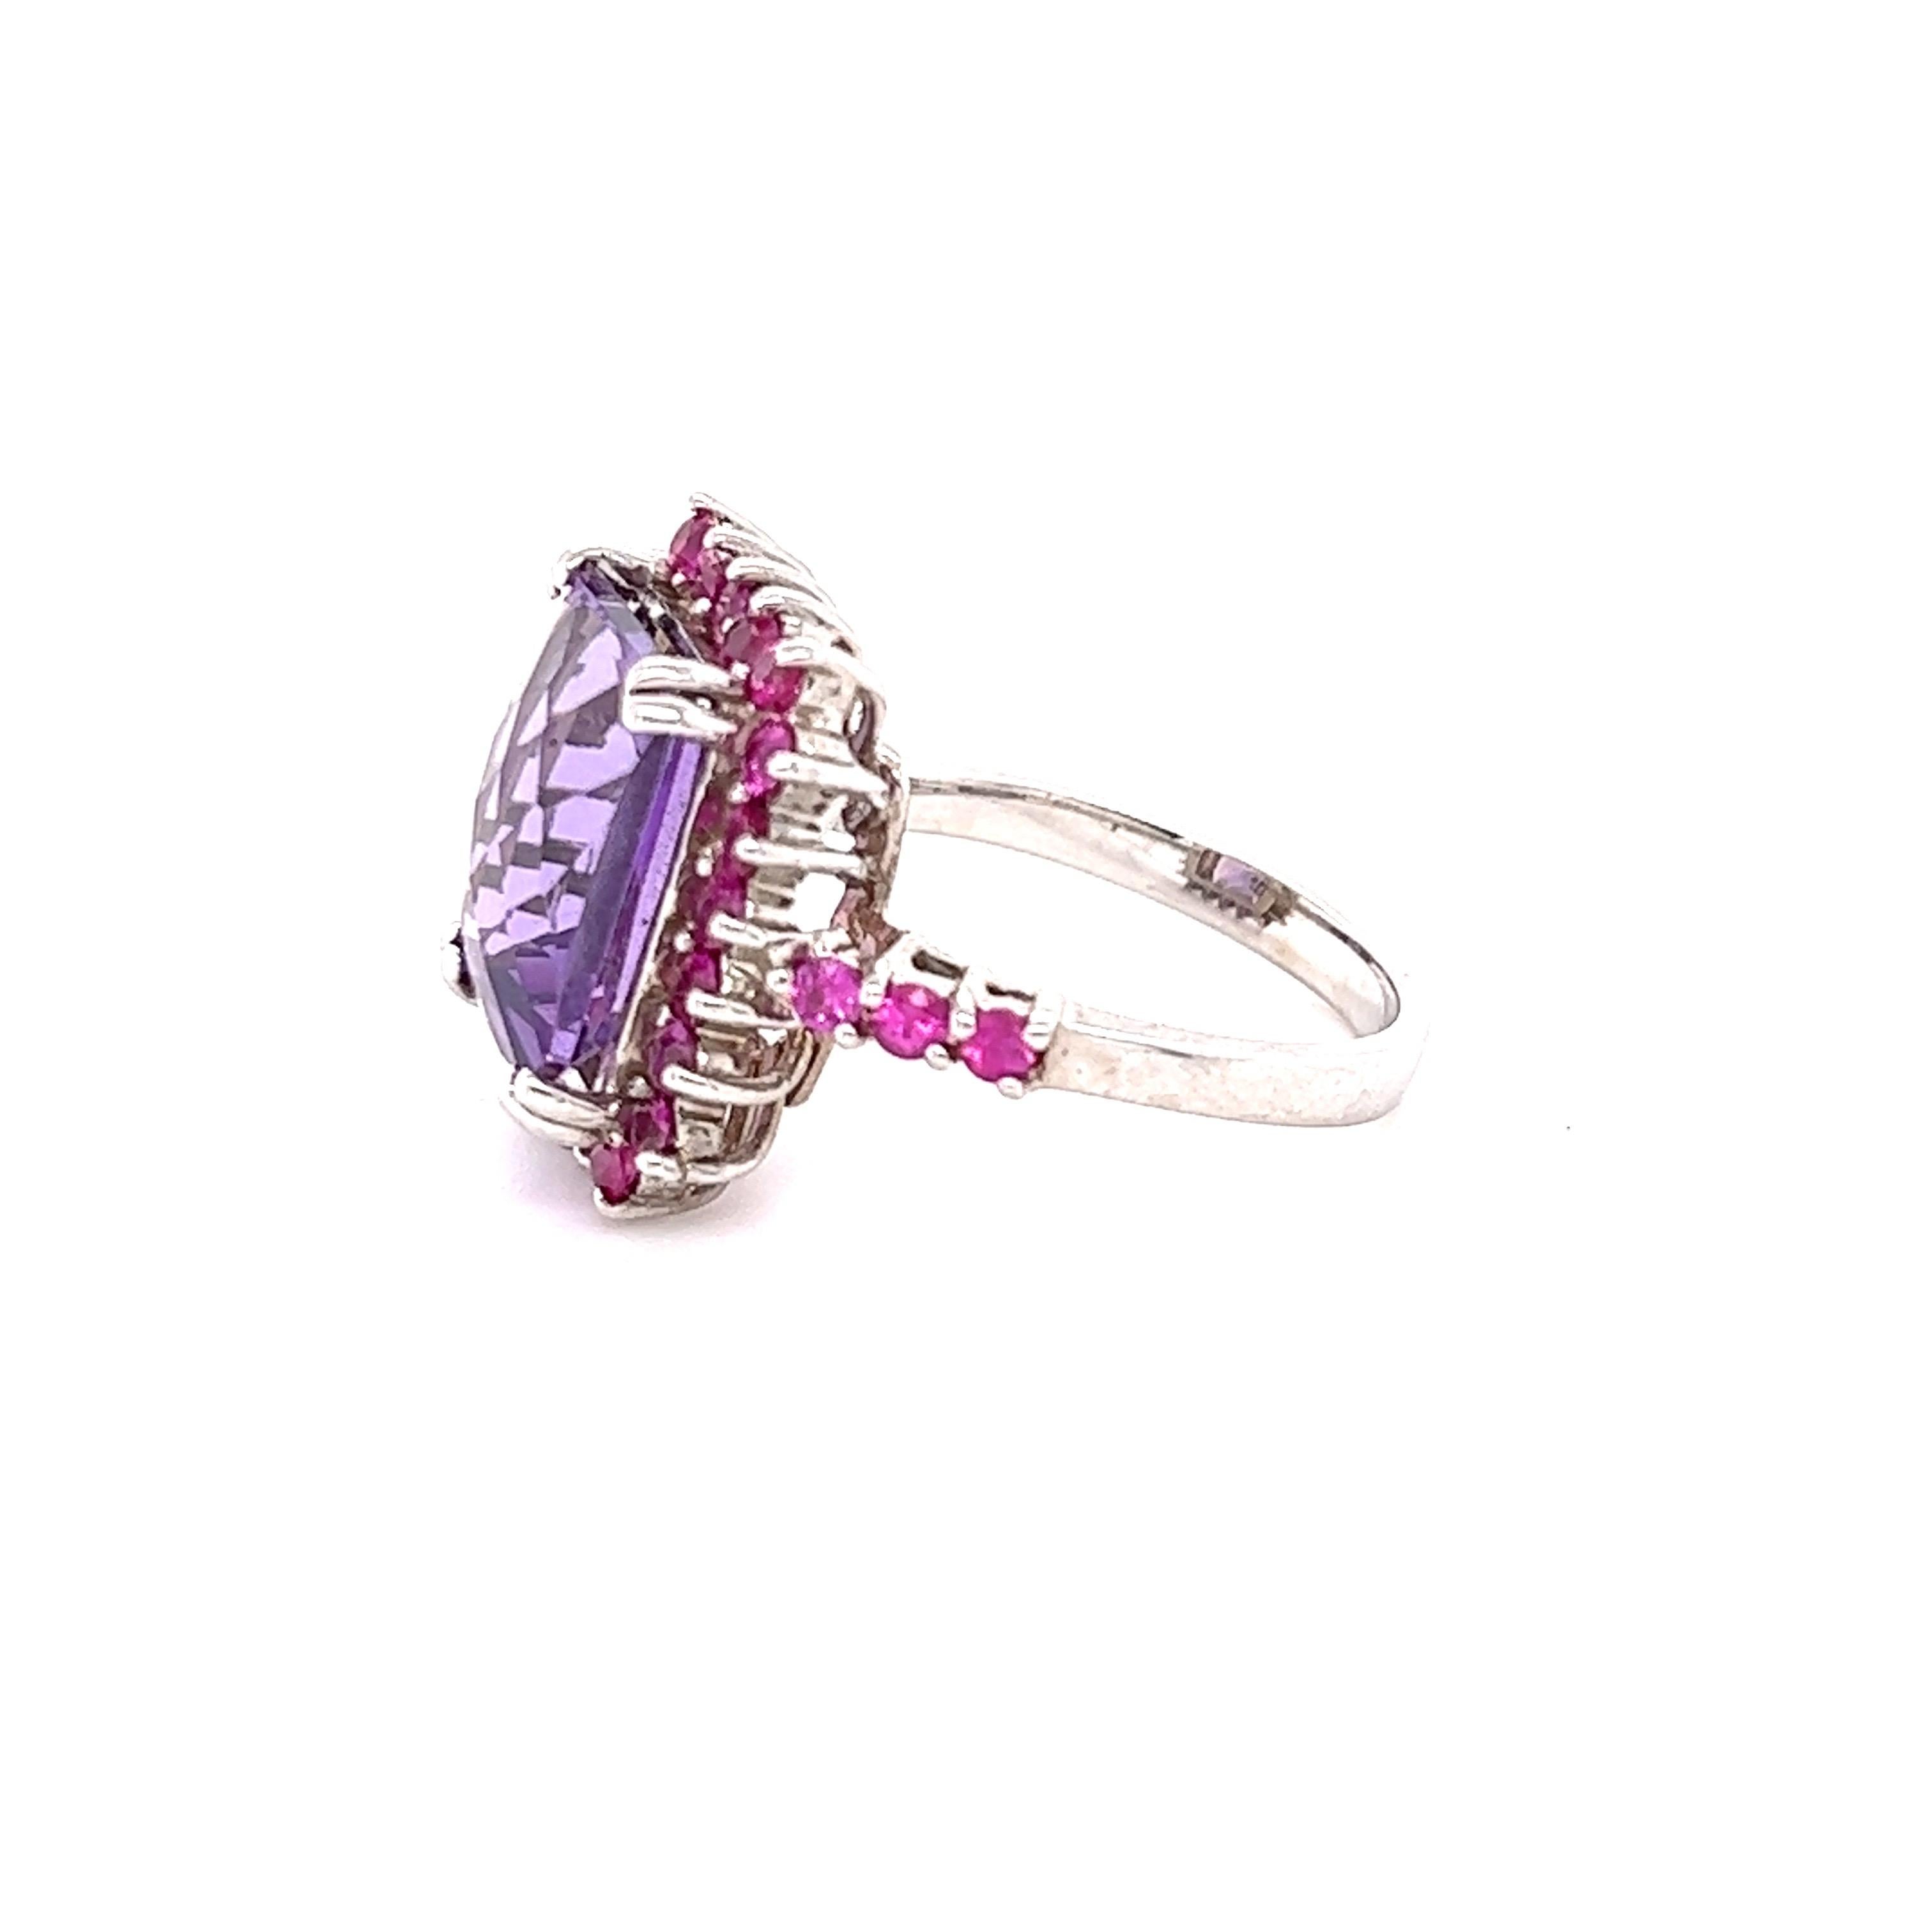 Contemporary 6.79 Carat Amethyst Pink Sapphire Diamond White Gold Cocktail Ring For Sale